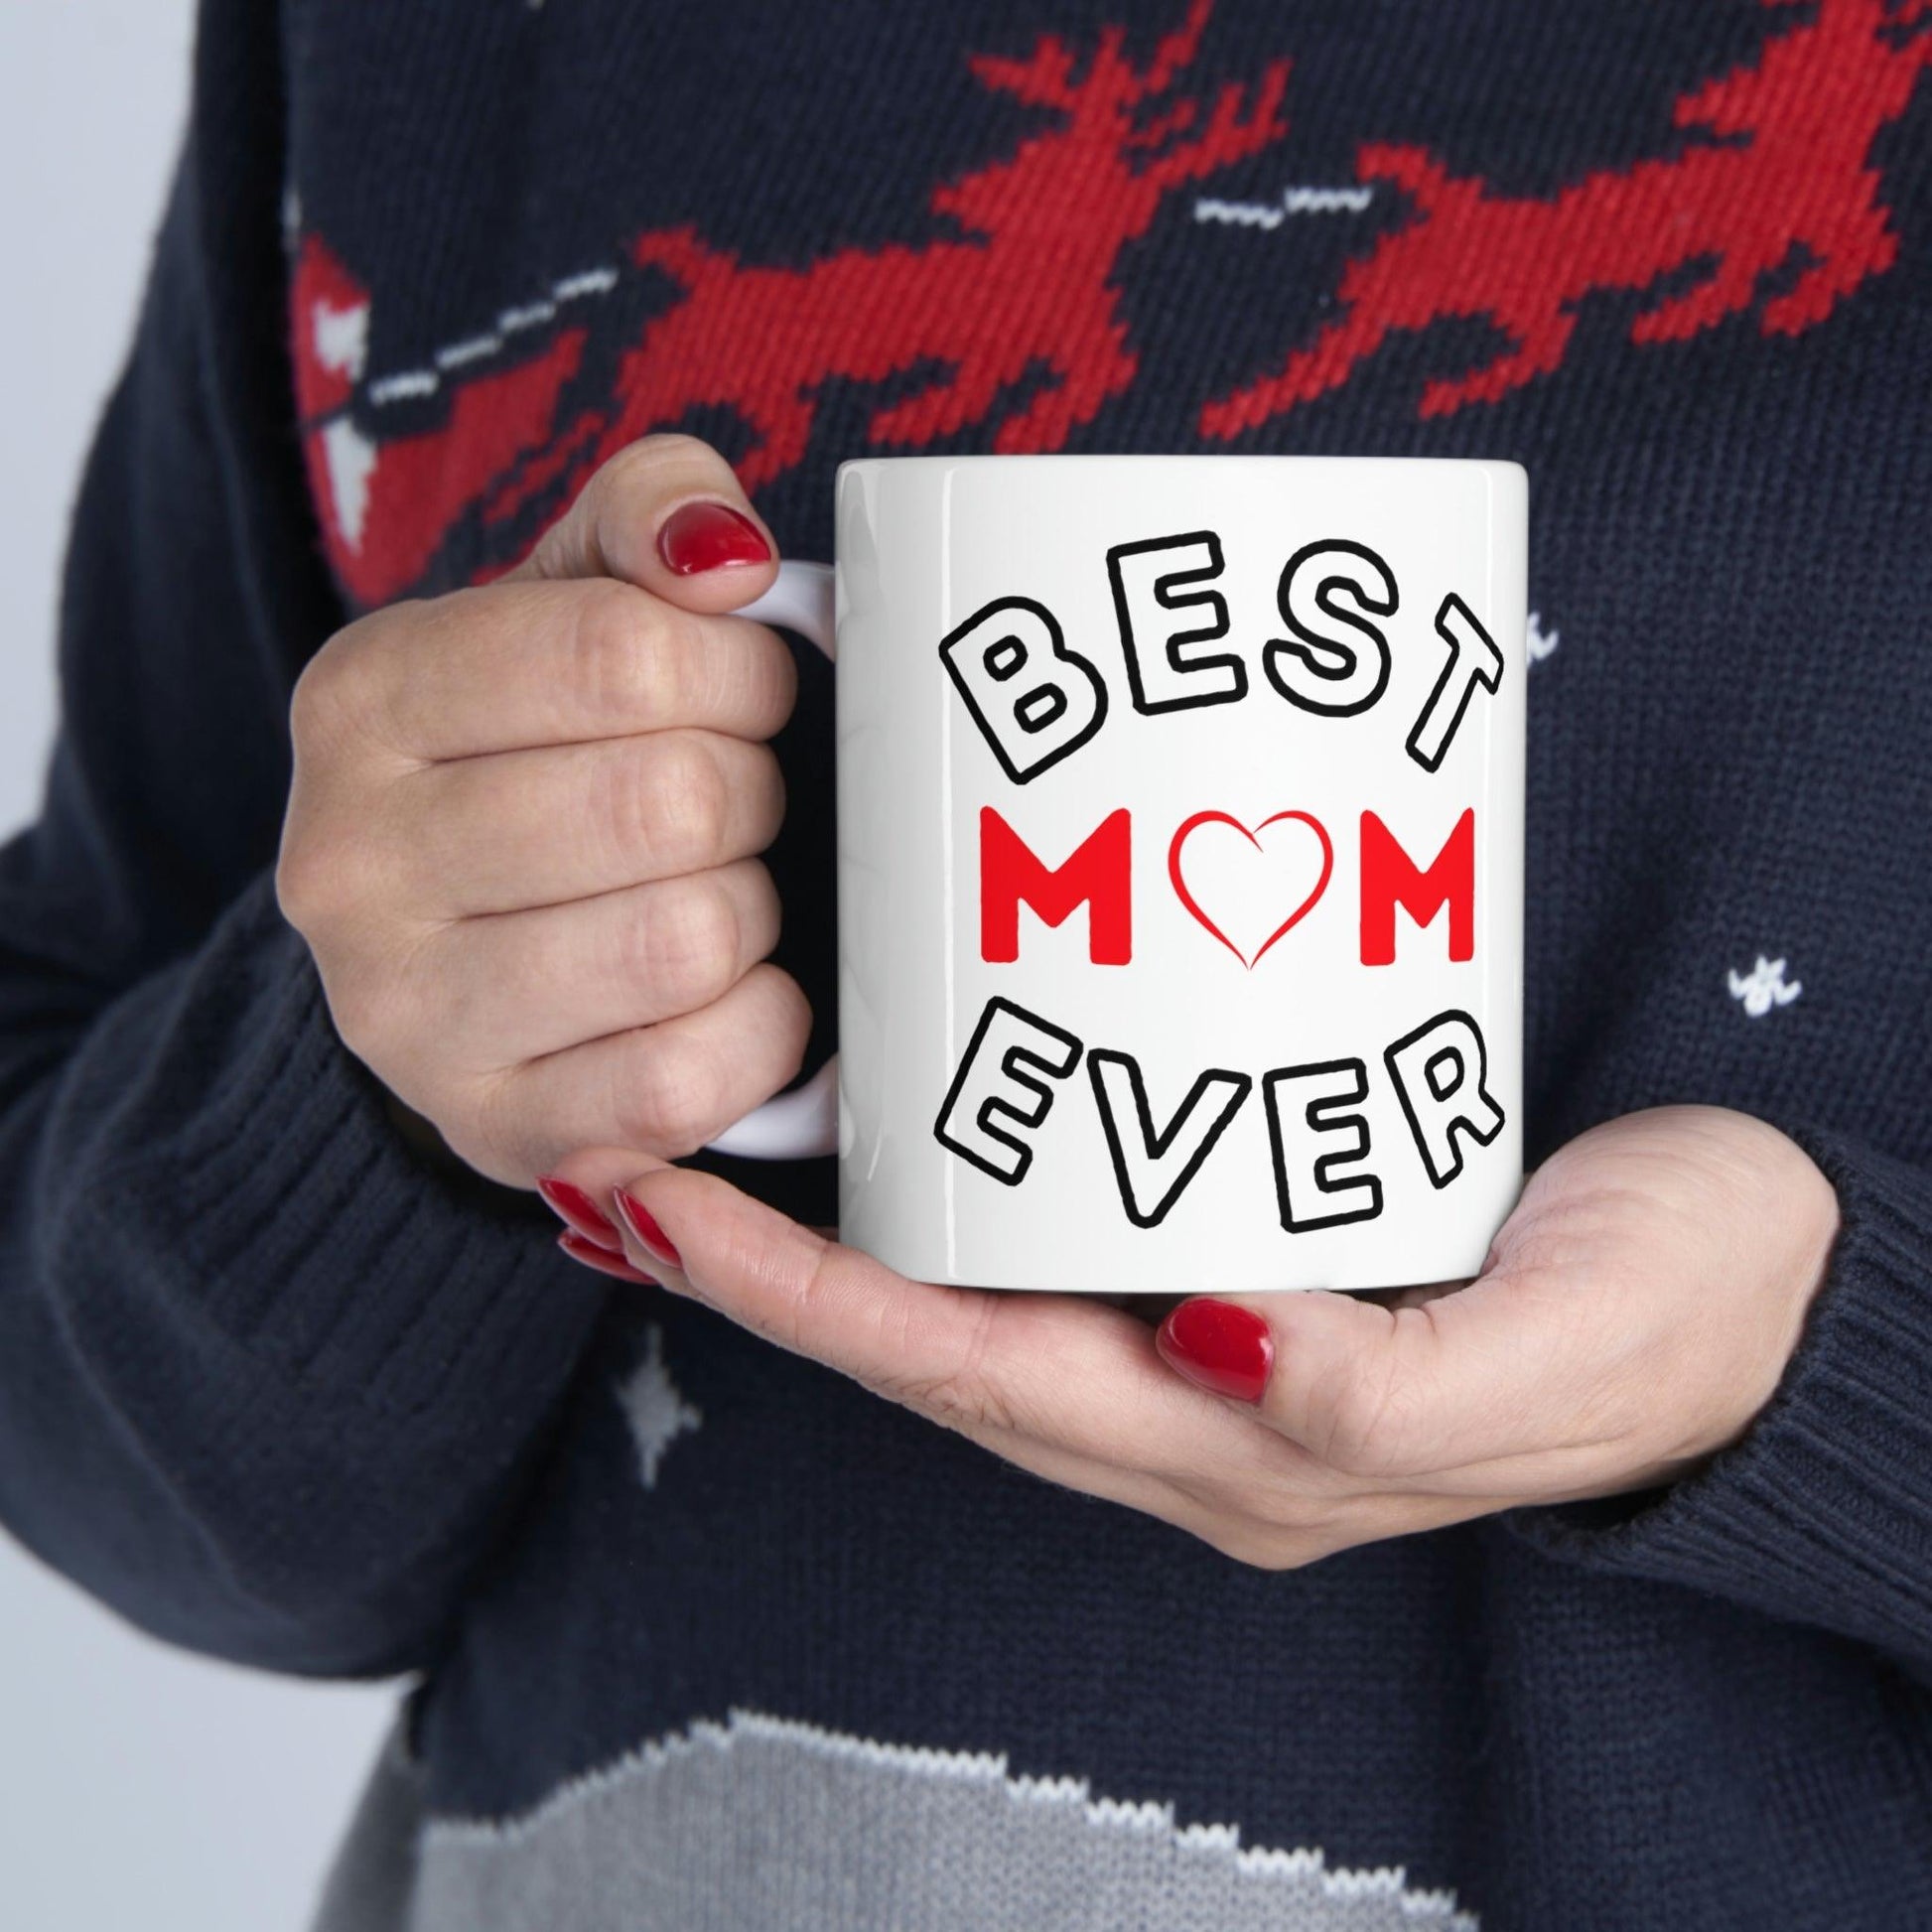 Best Mom Ever Mug, gift for mom on mothers day, Birthday gift for mom, gift for her, coffee mug for her, hot cocoa mug, gift for coffee lover - Giftsmojo